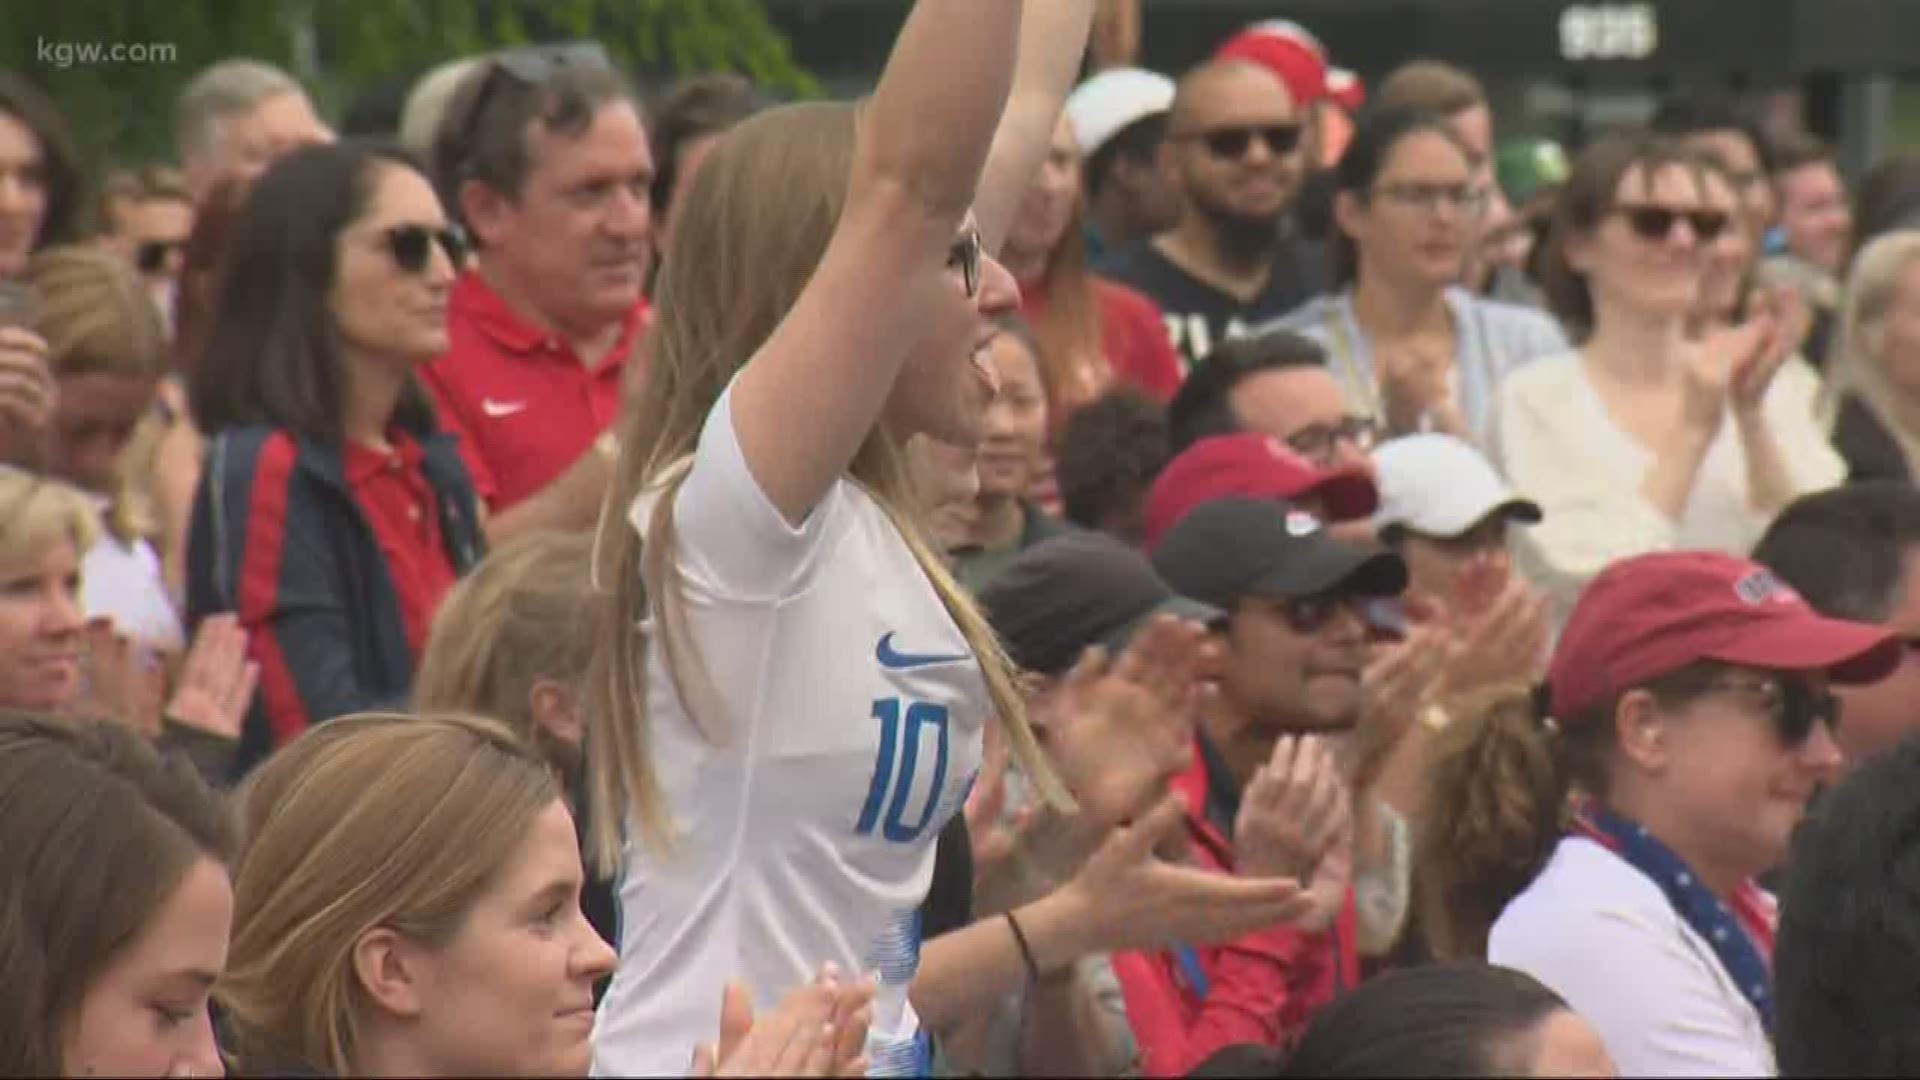 Fans around the world were watching as the U.S. women’s soccer team won its fourth World Cup title. And with Portland being Soccer City USA, you know people packed the local bars and restaurants to watch!